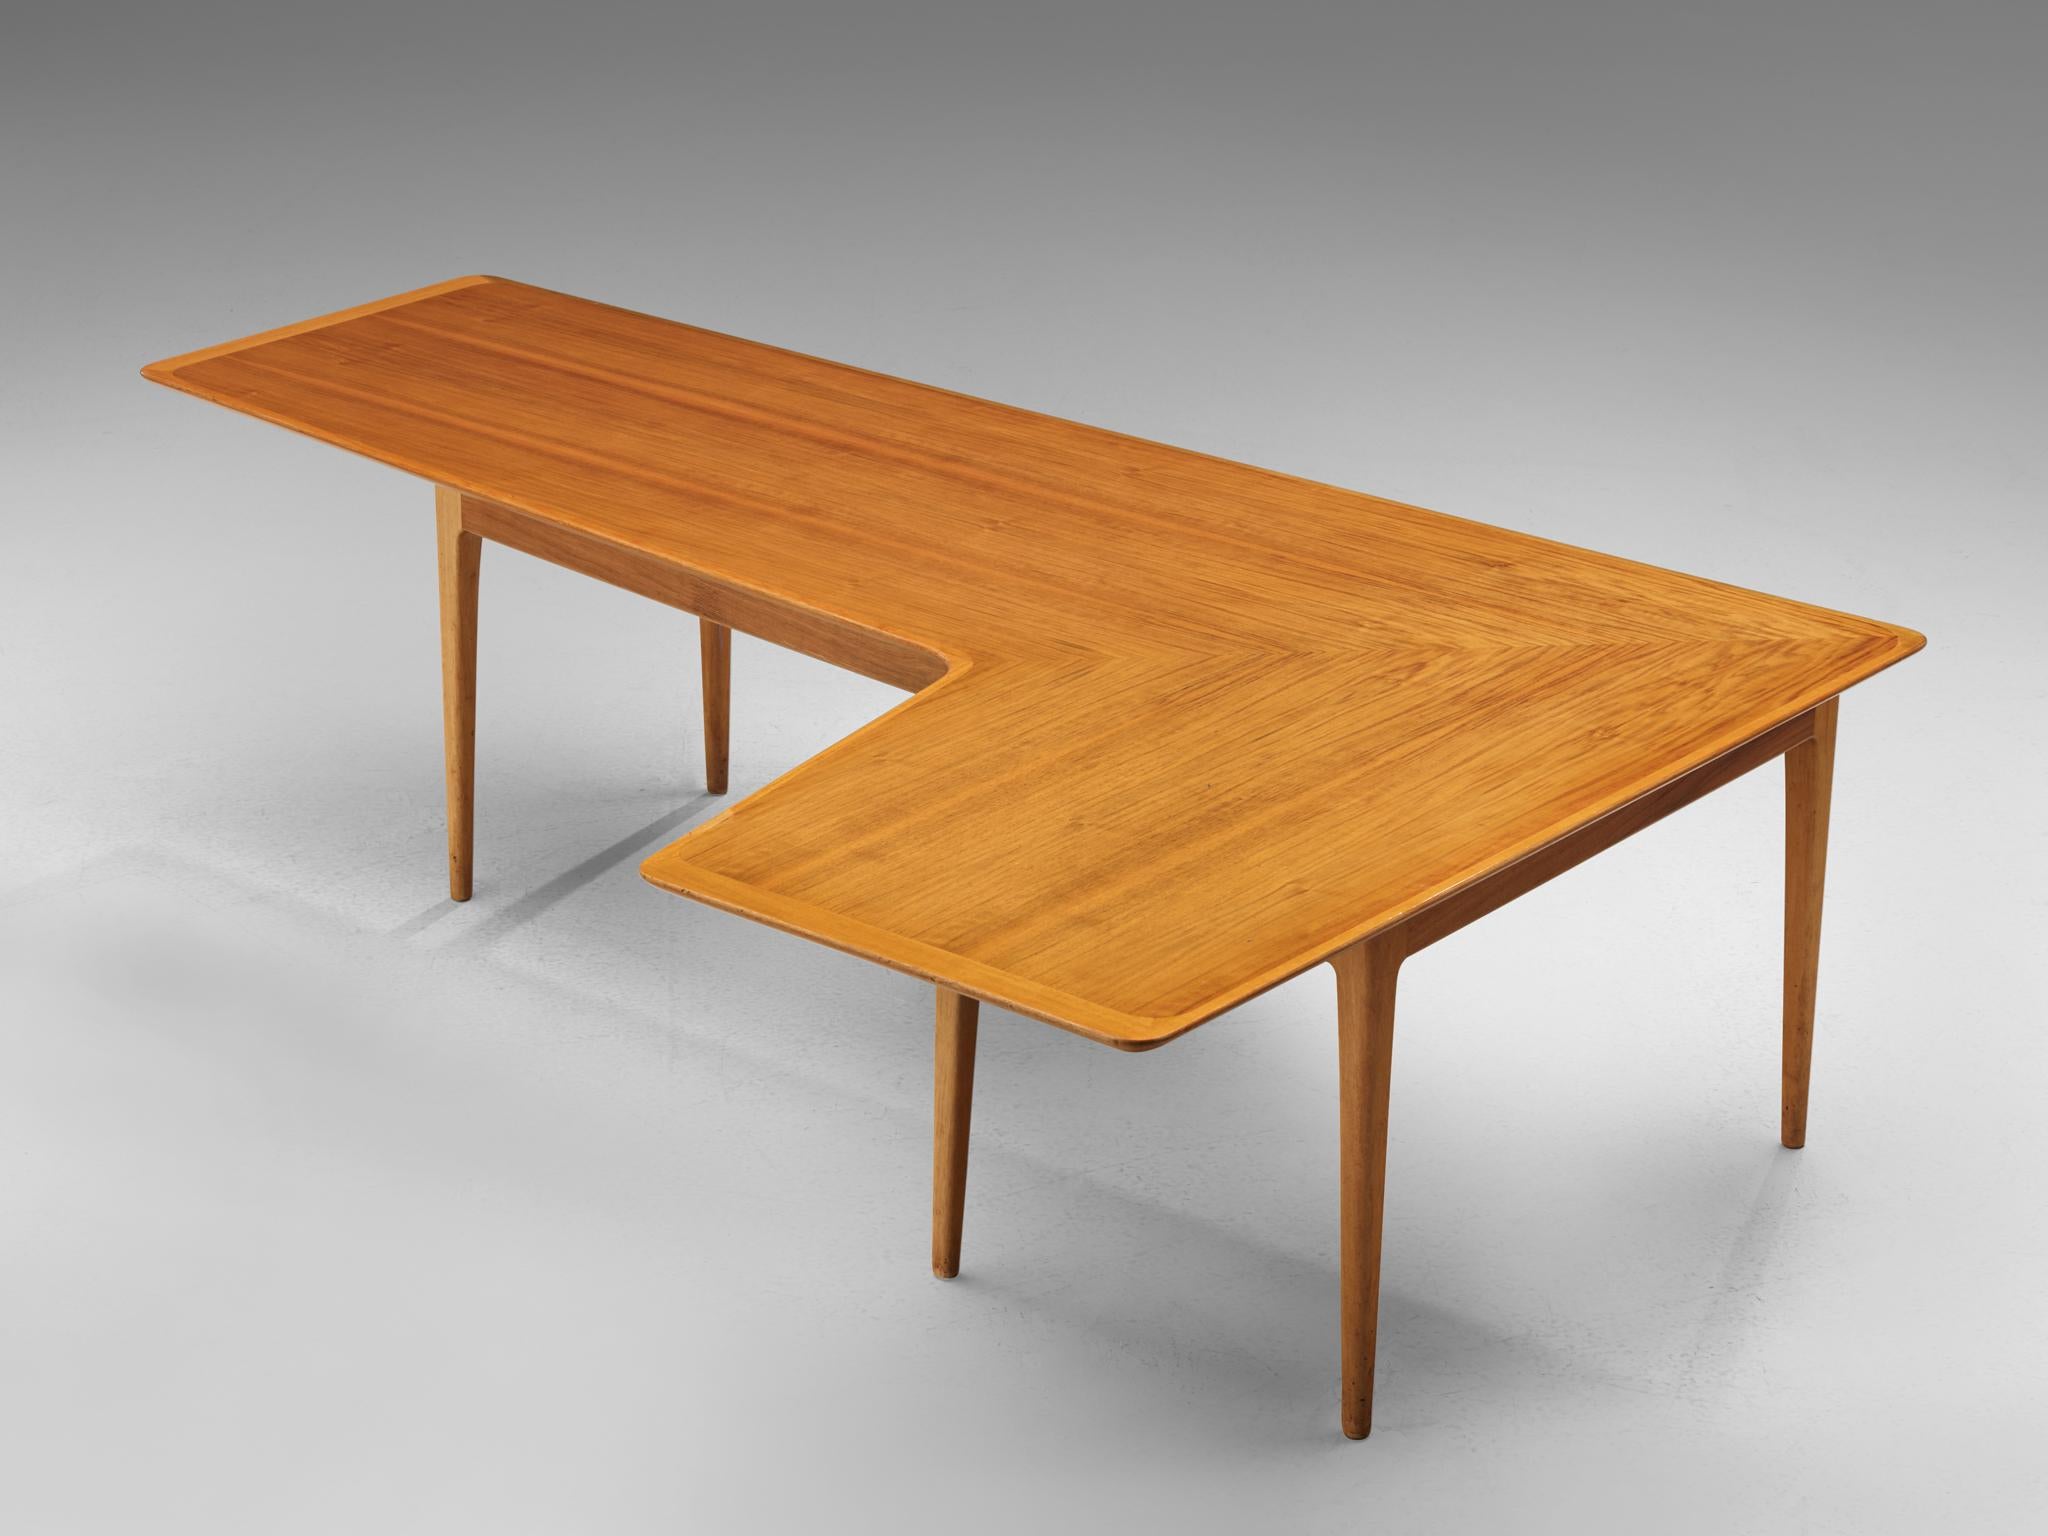 Coffee table, walnut, Denmark, 1960s 

This elegant angular table is made in Denmark in the 1960s. It is executed with squared tapered legs and an eye-catching boomerang shaped top in walnut wood. The table top shows a beautiful subtle wood grain